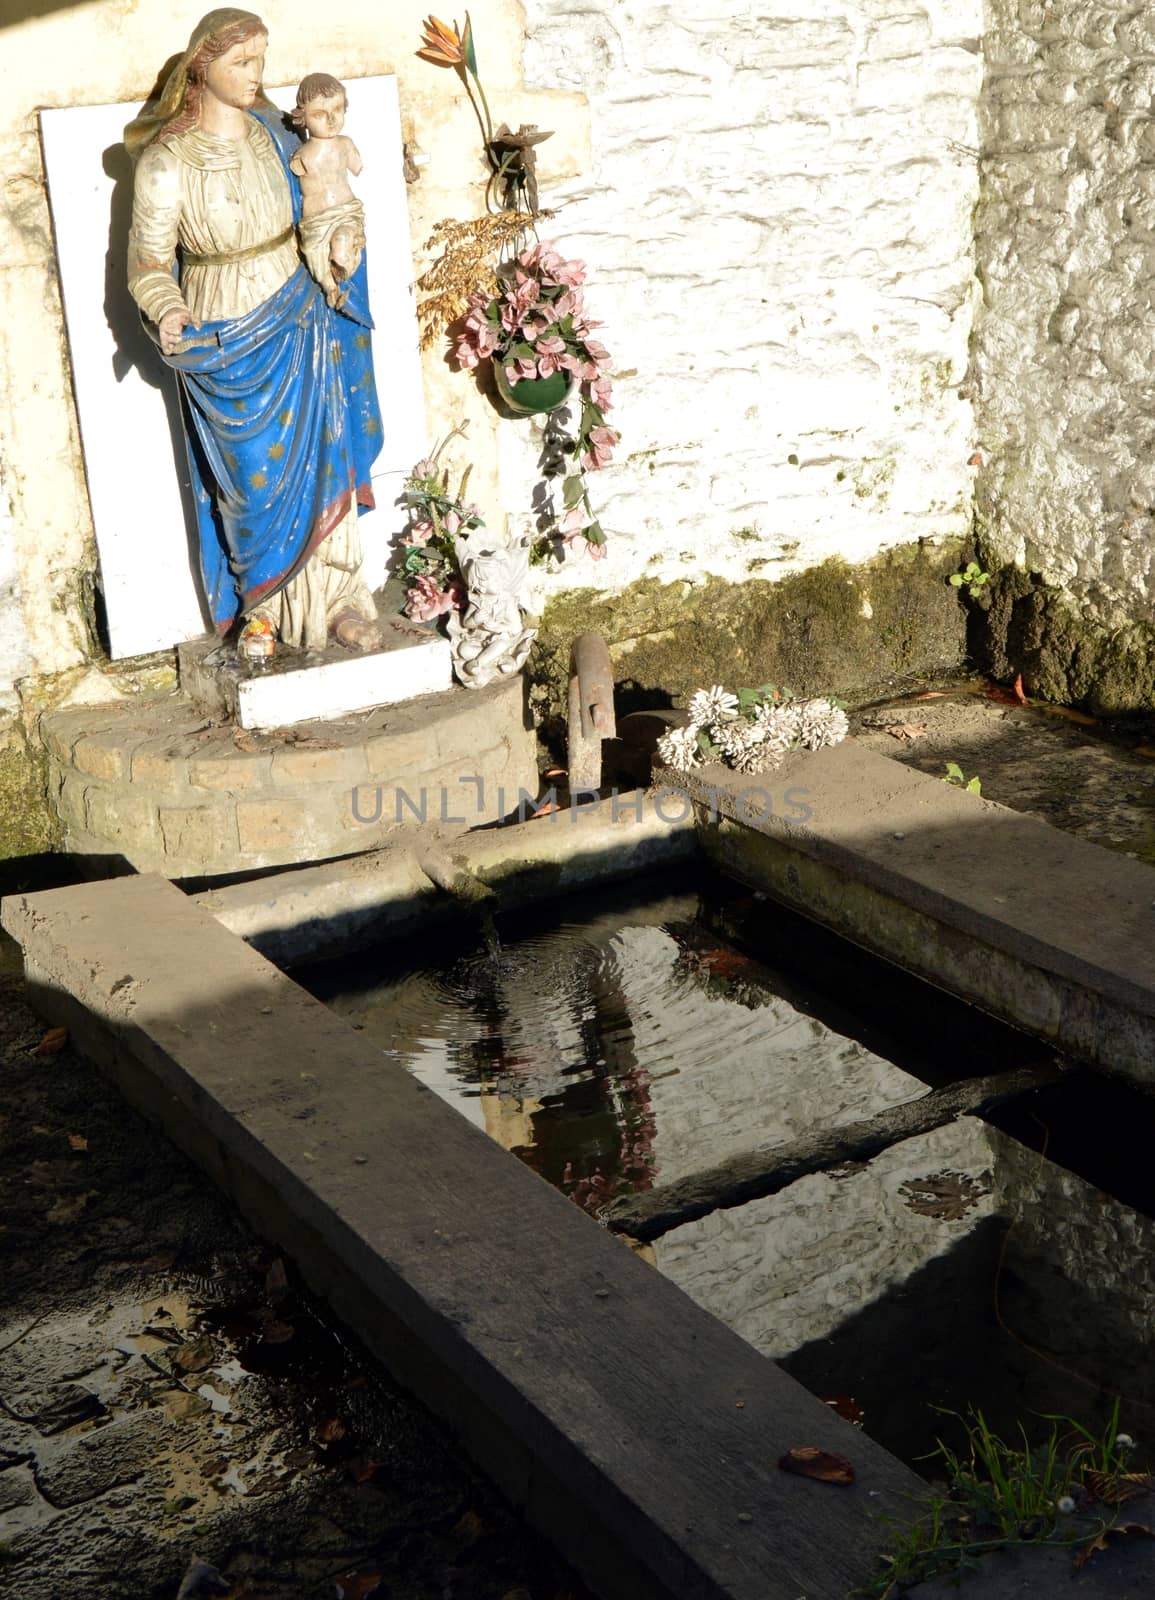 Virgin Mary and Child Jesus over an old water fountain with a laundry tub